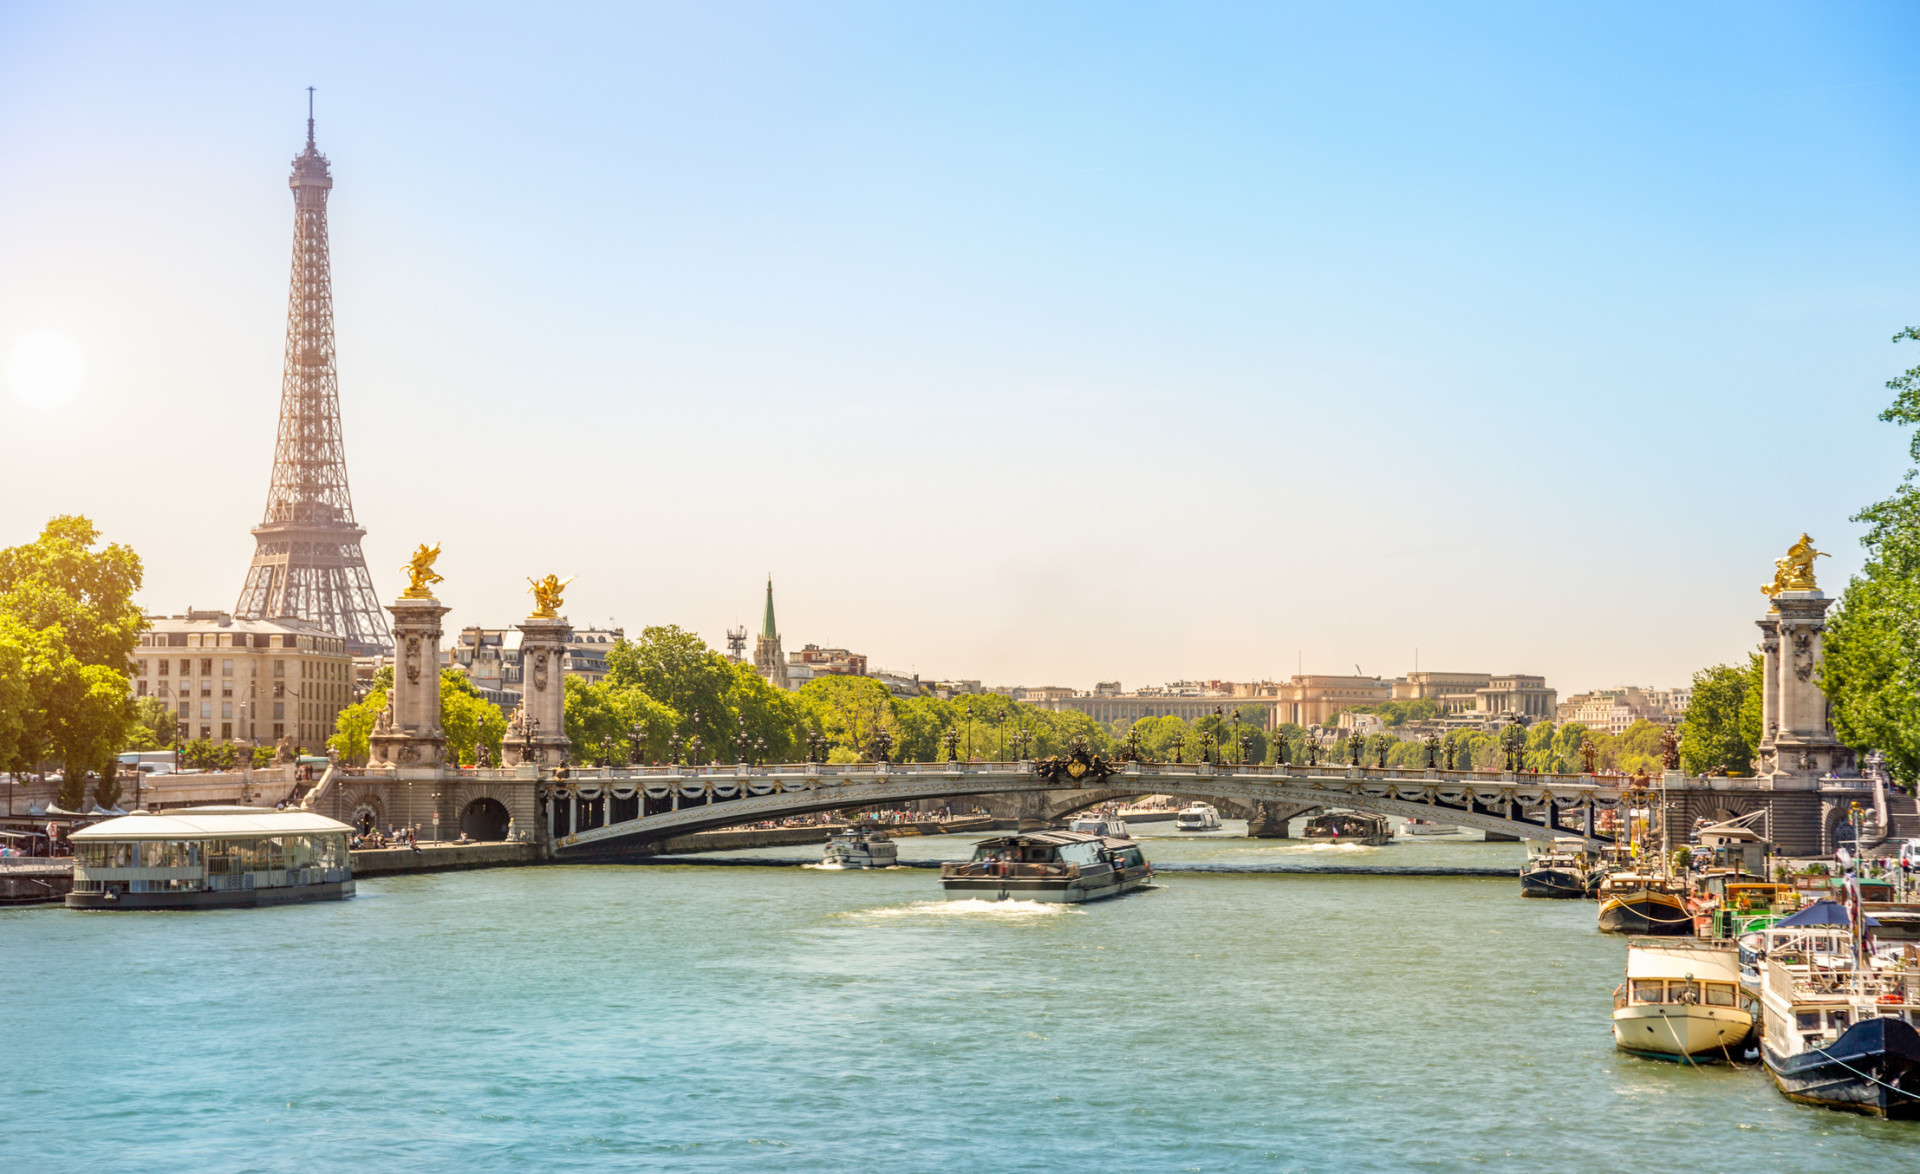 The French capital is one of the most walkable cities in Europe, and transportation systems are easy to navigate, which means it's perfect to explore on your own.<p><a href="https://www.msn.com/en-us/community/channel/vid-7xx8mnucu55yw63we9va2gwr7uihbxwc68fxqp25x6tg4ftibpra?cvid=94631541bc0f4f89bfd59158d696ad7e">Follow us and access great exclusive content every day</a></p>